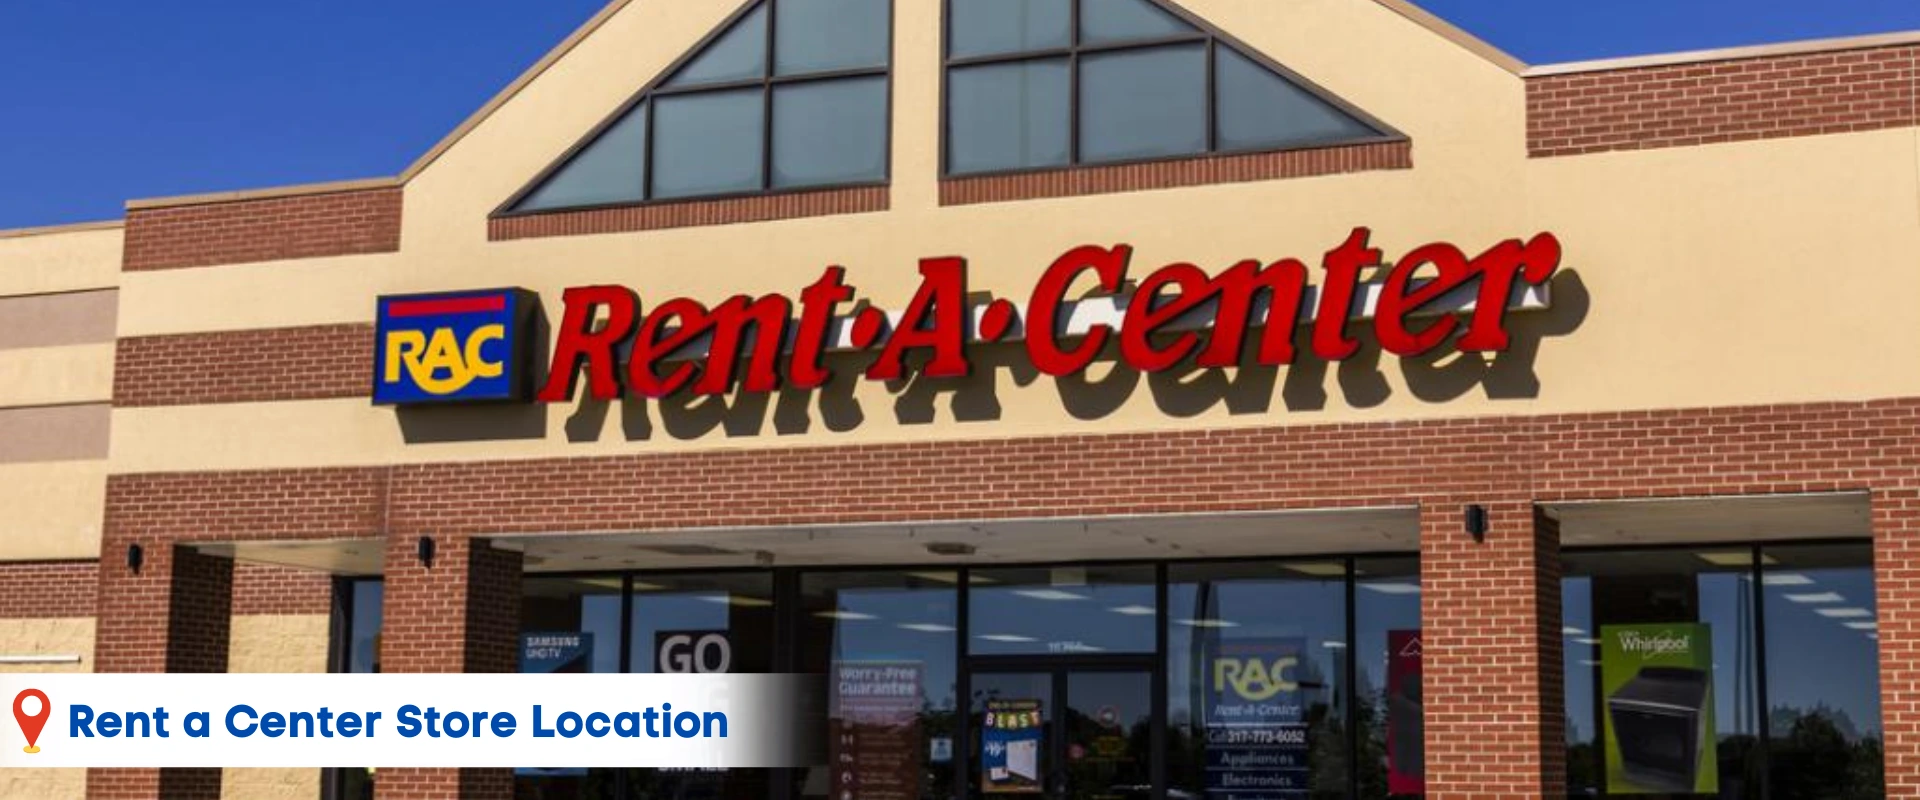 Rent a Center Near Me in Gloversville, NY.